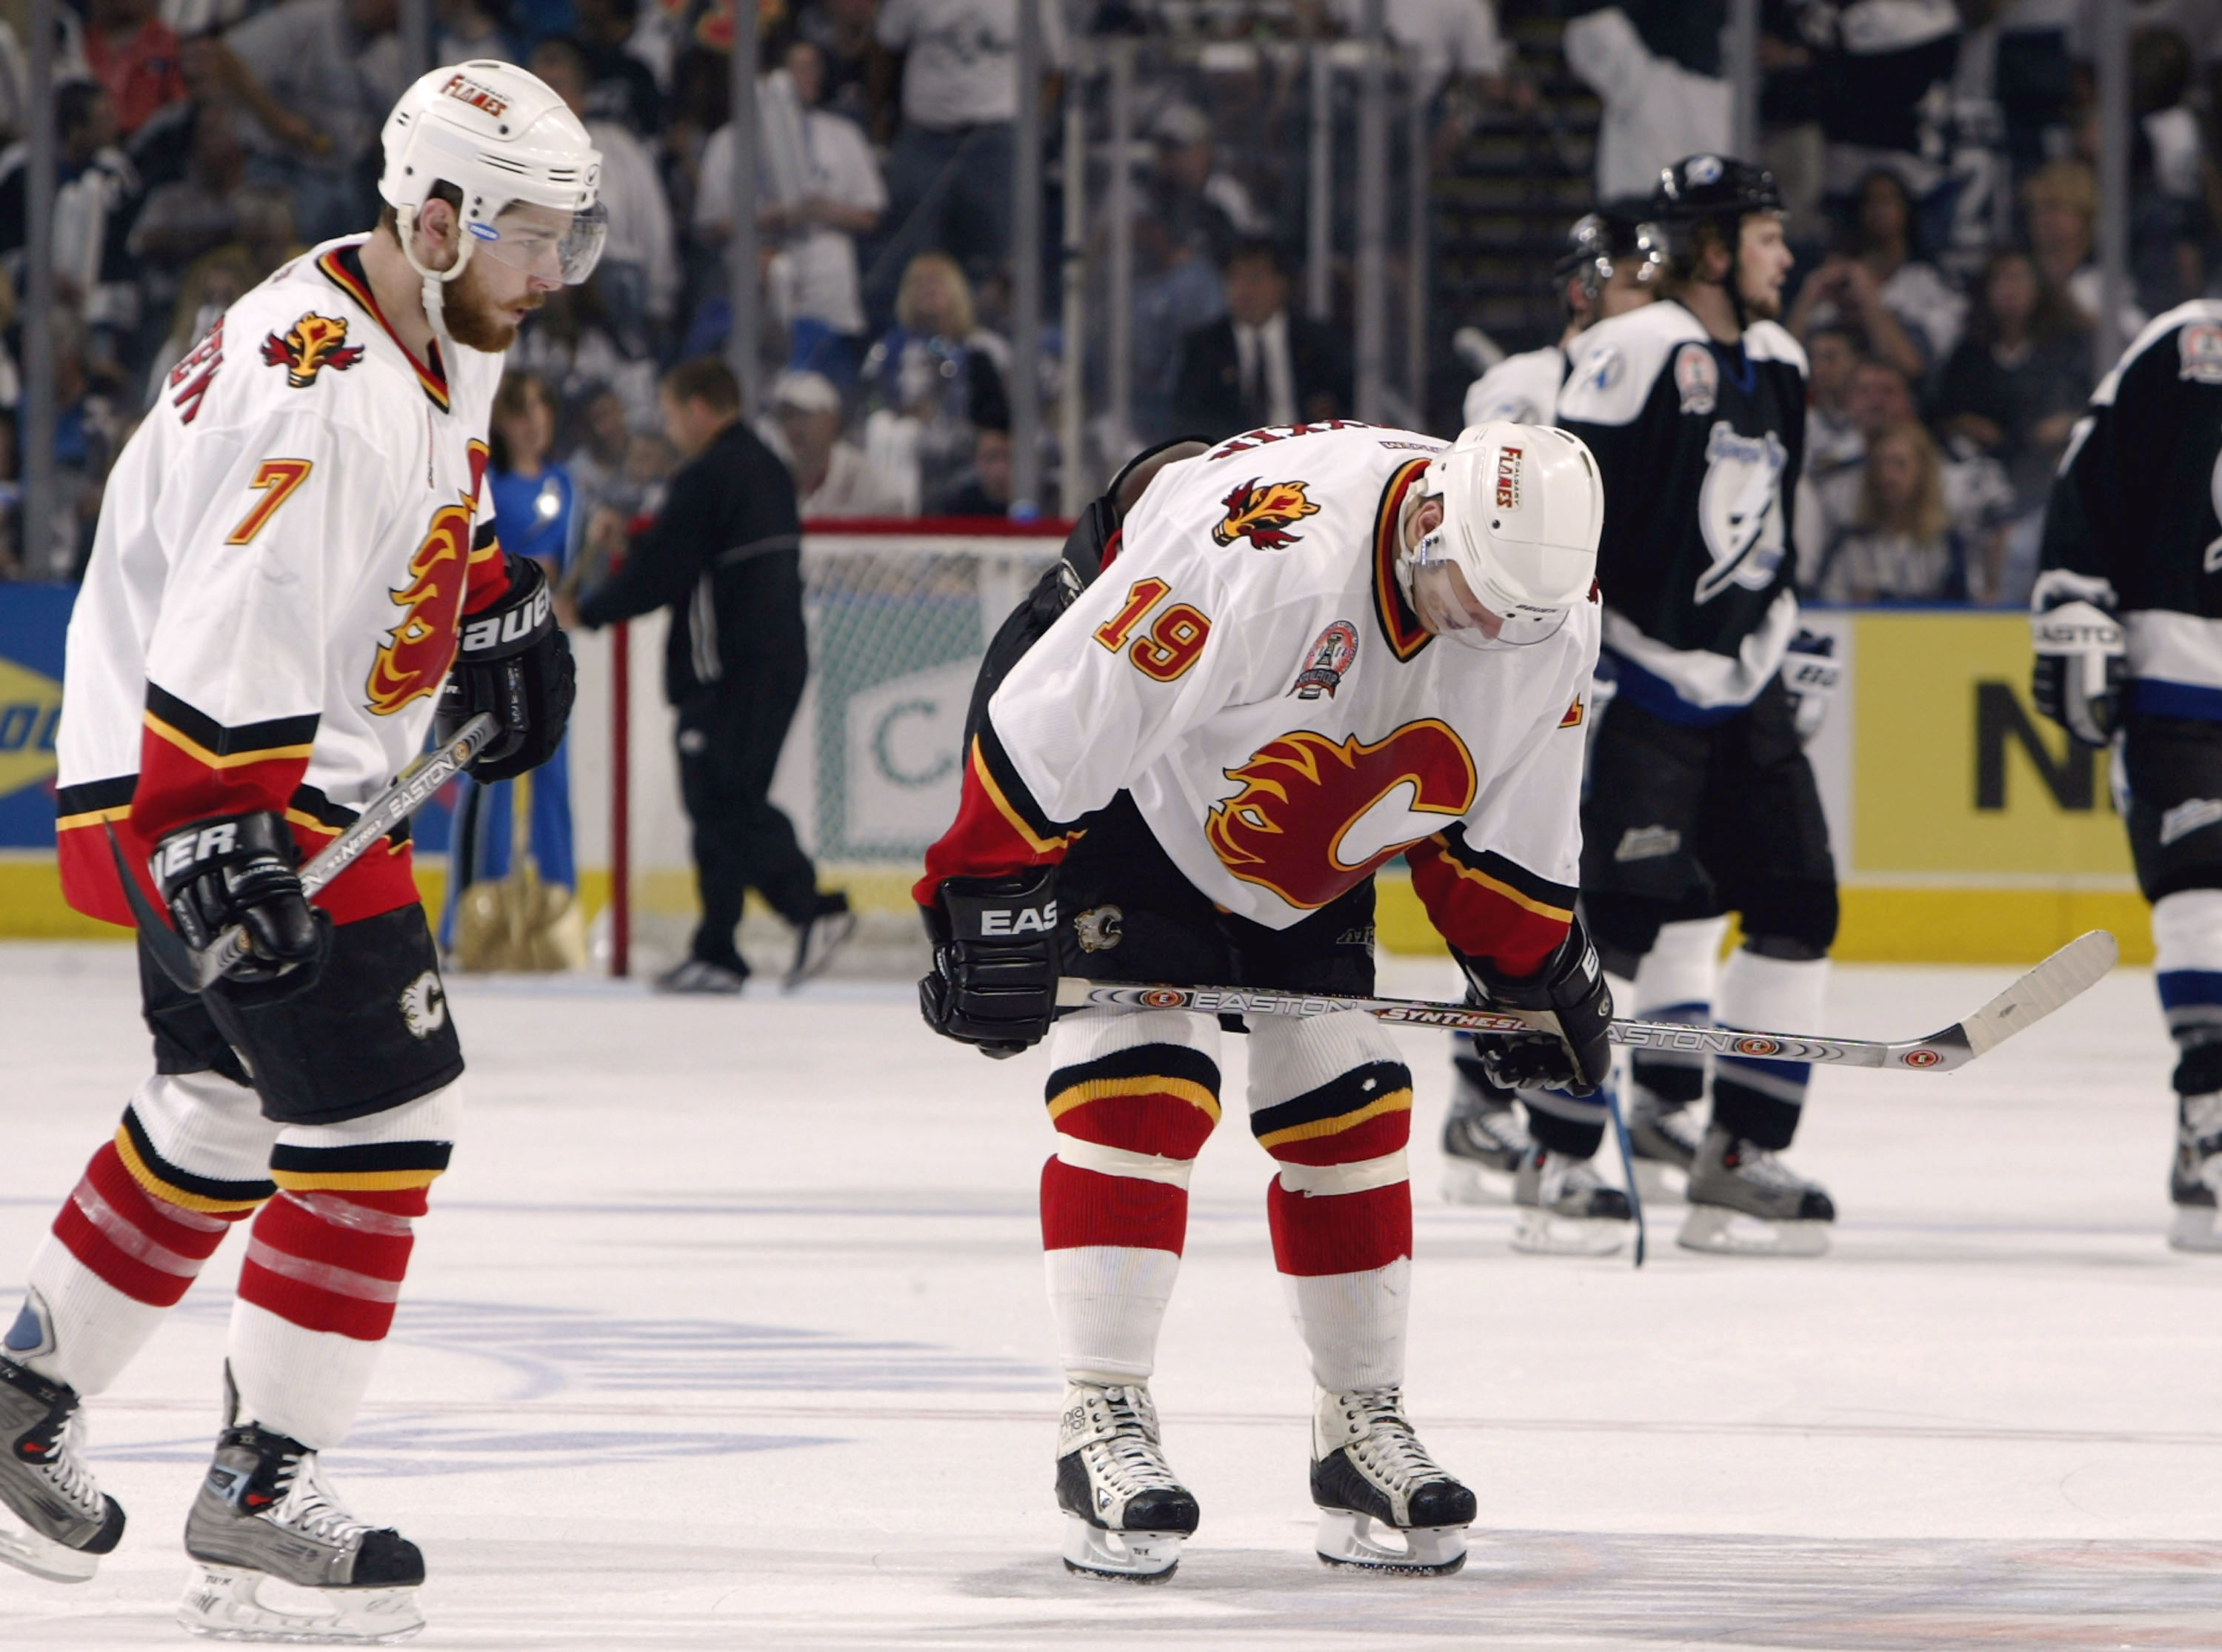 Throwback Thursday: Flames take on the Canadiens at Heritage